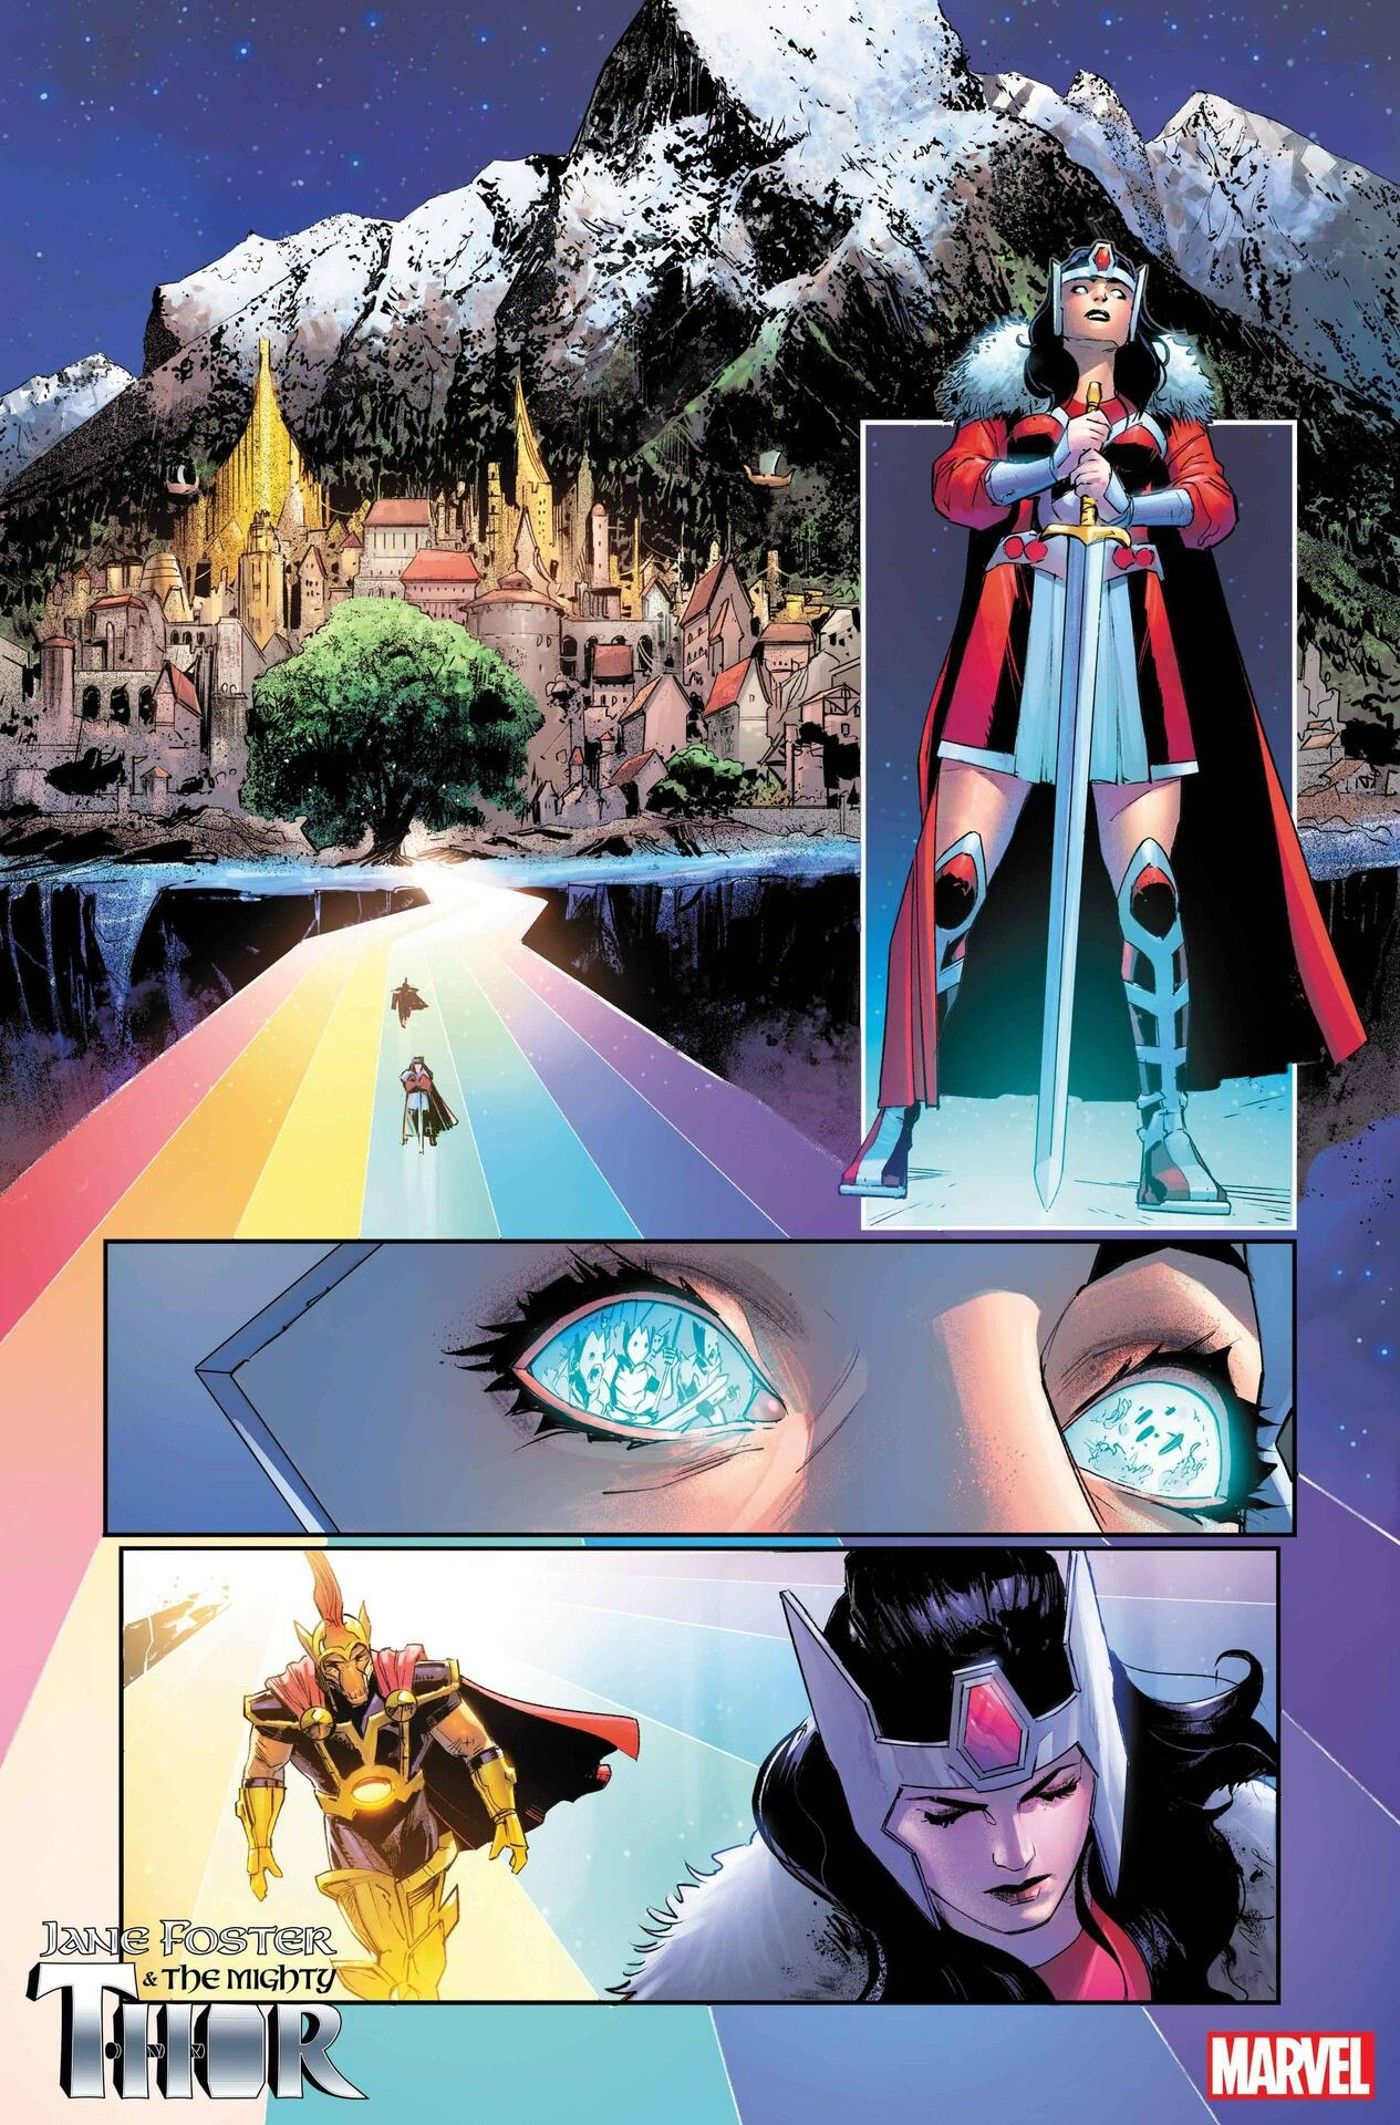 Jane Foster Might Thor Preview Page 1